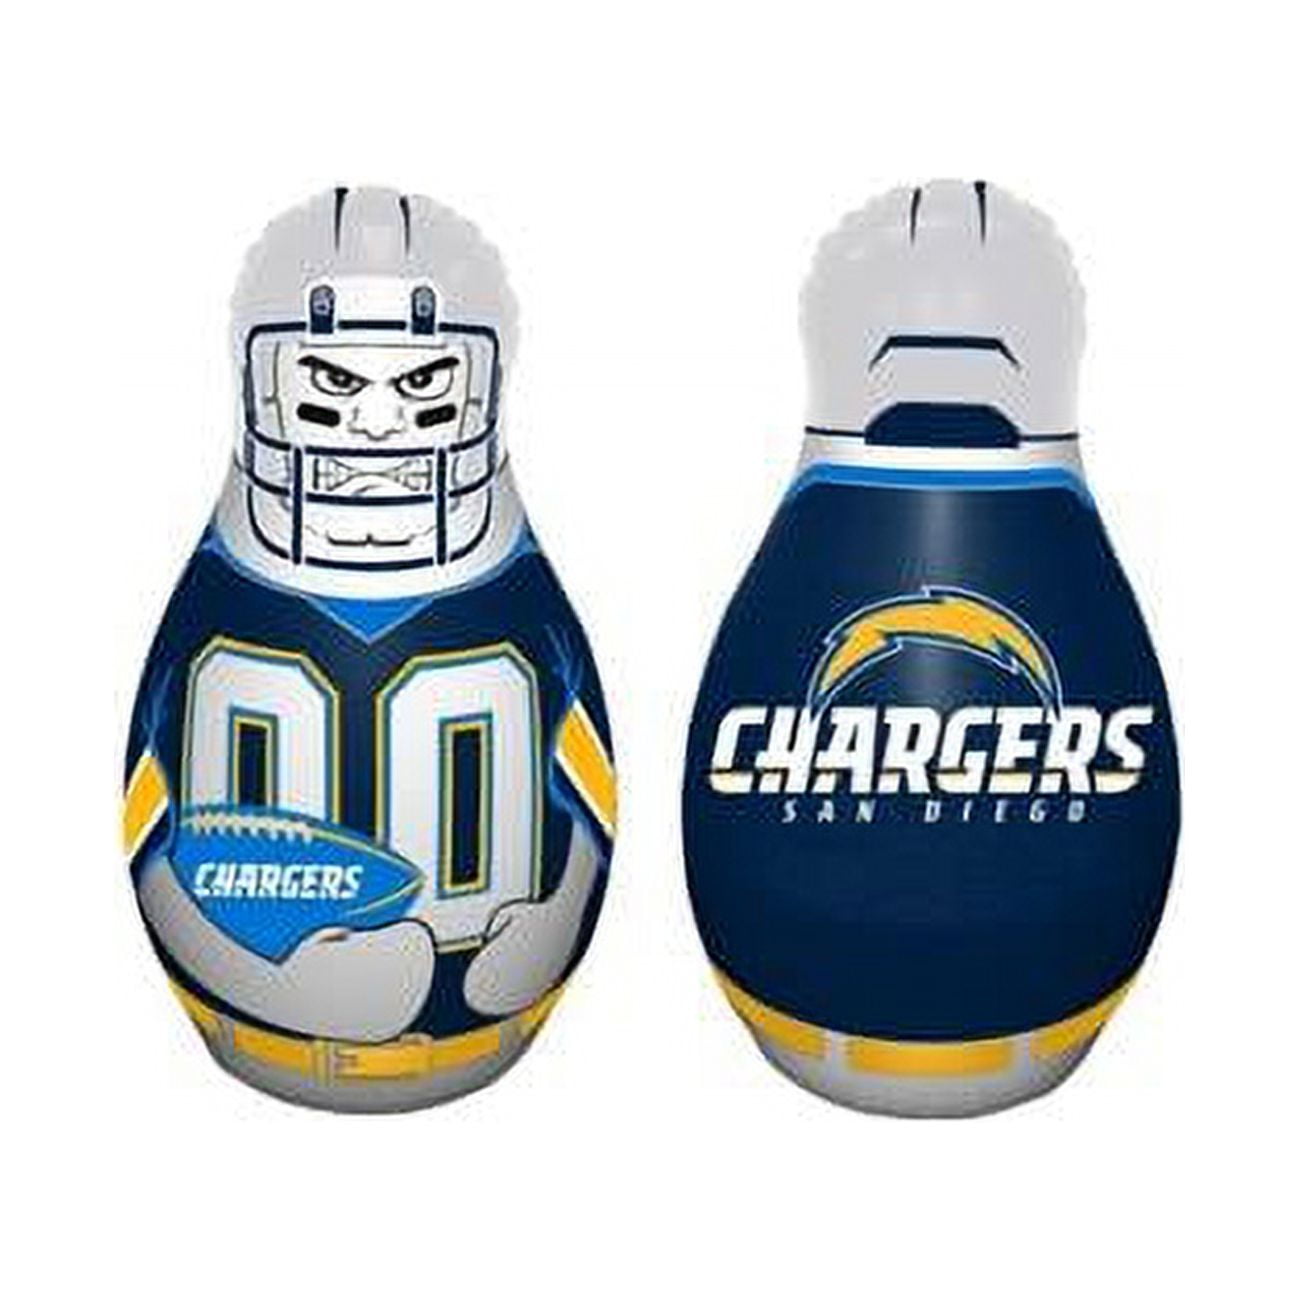 Picture of Fremont Die 2324595619 San Diego Chargers Mini Bop Bag